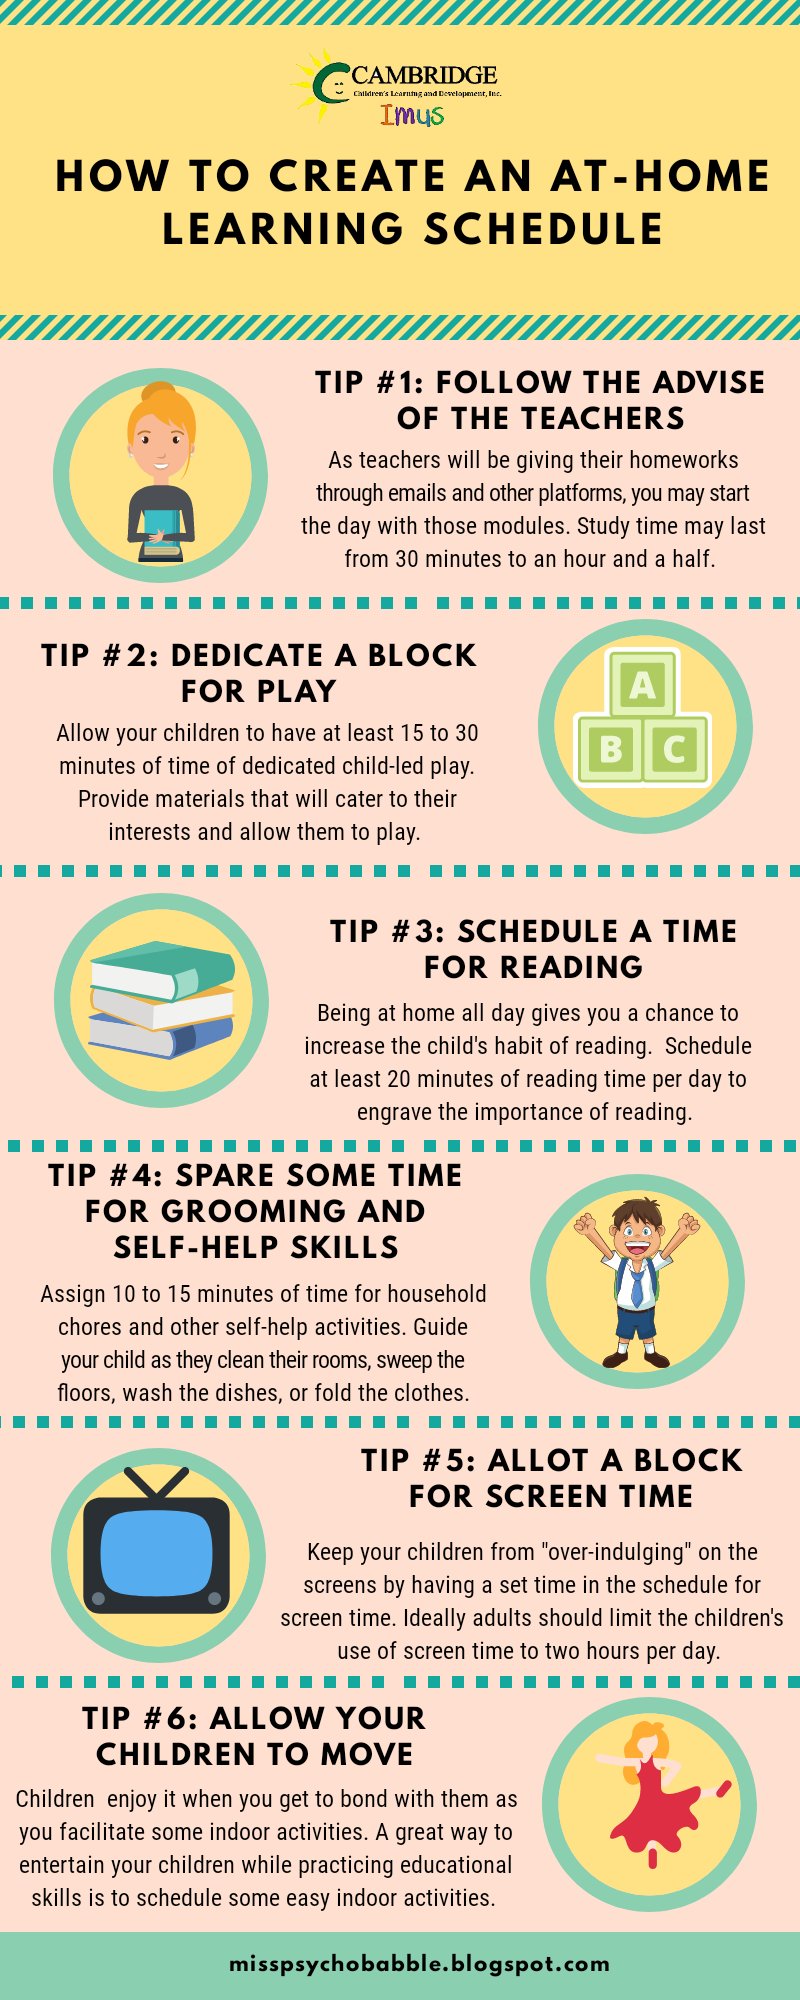 Creating an at-home learning schedule